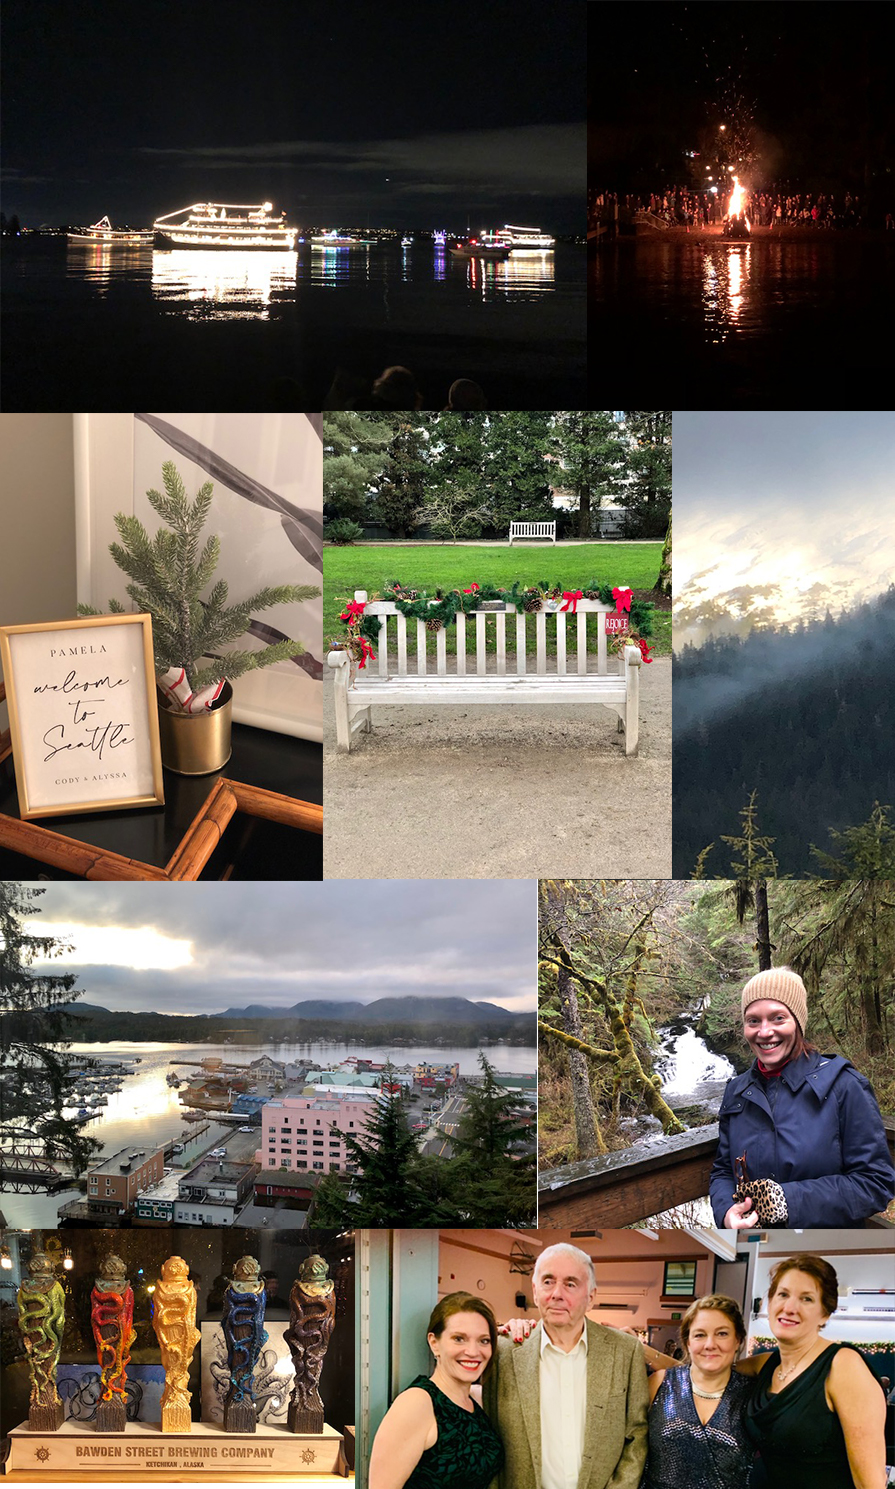 Holiday Travels - Collage of Photos from 2019 Holiday Trip to Seattle and Alaska